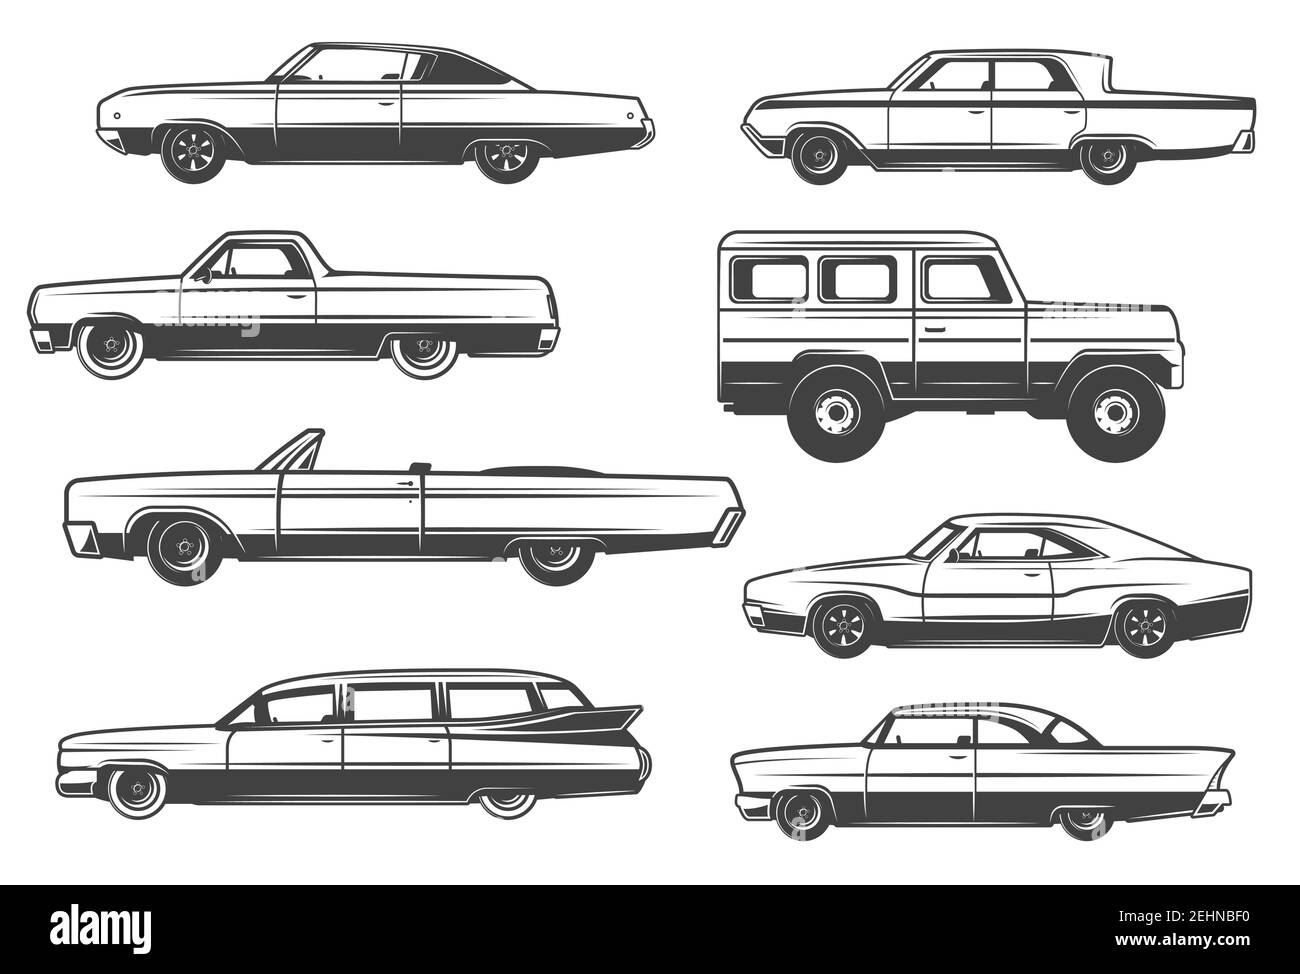 Retro cars and vintage rarity automobile models. Vector luxury